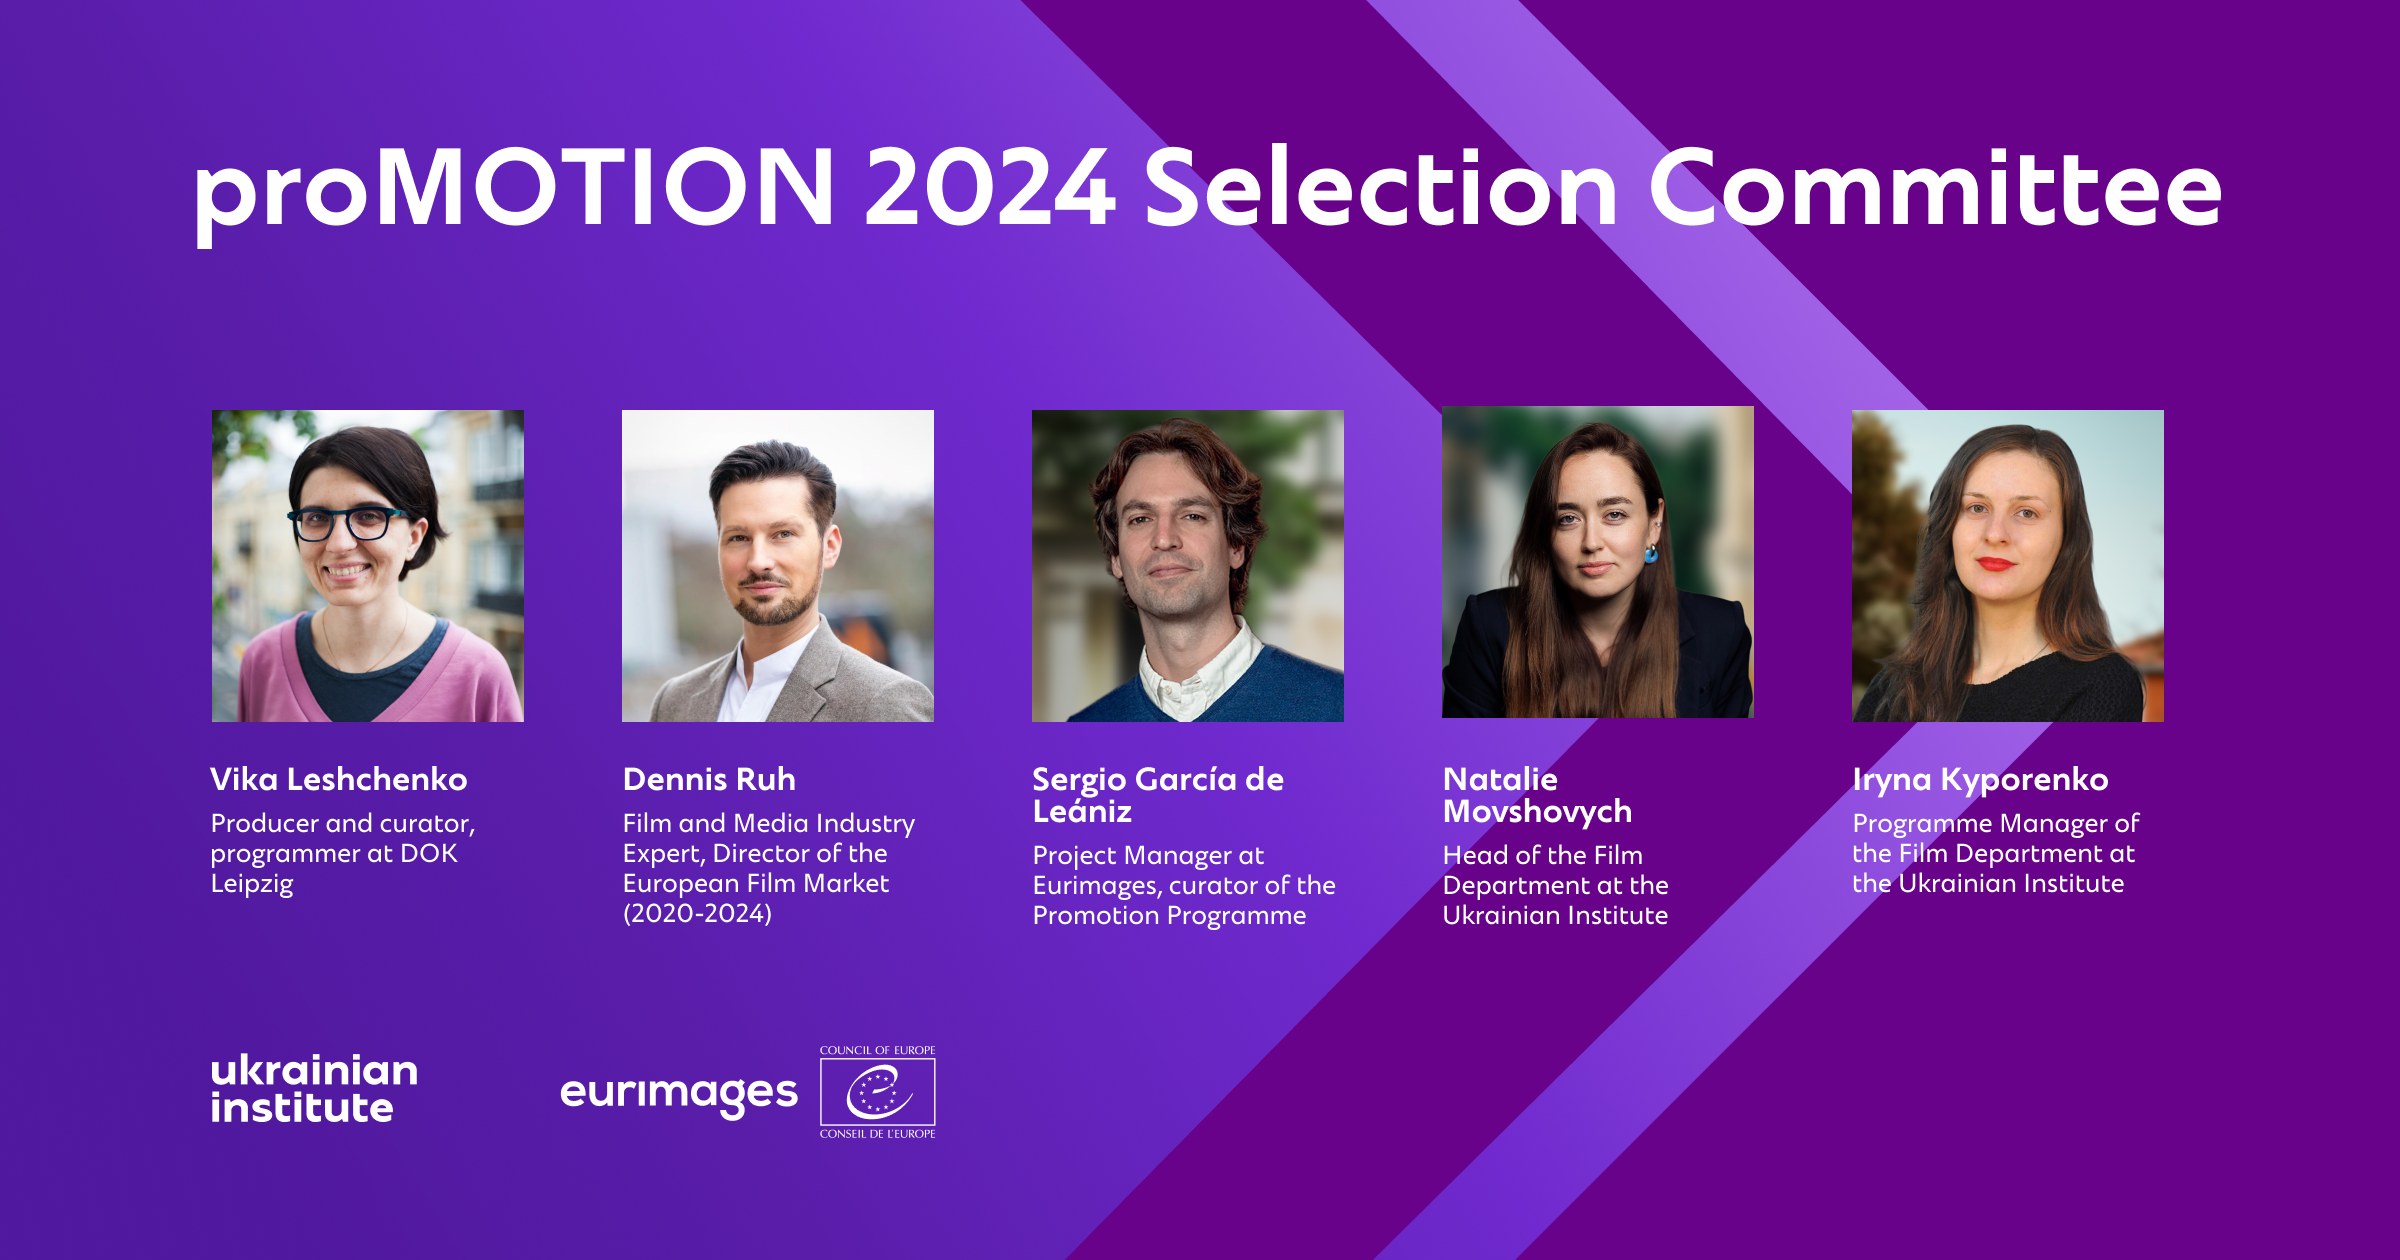 Selection Committee for the proMOTION 2024